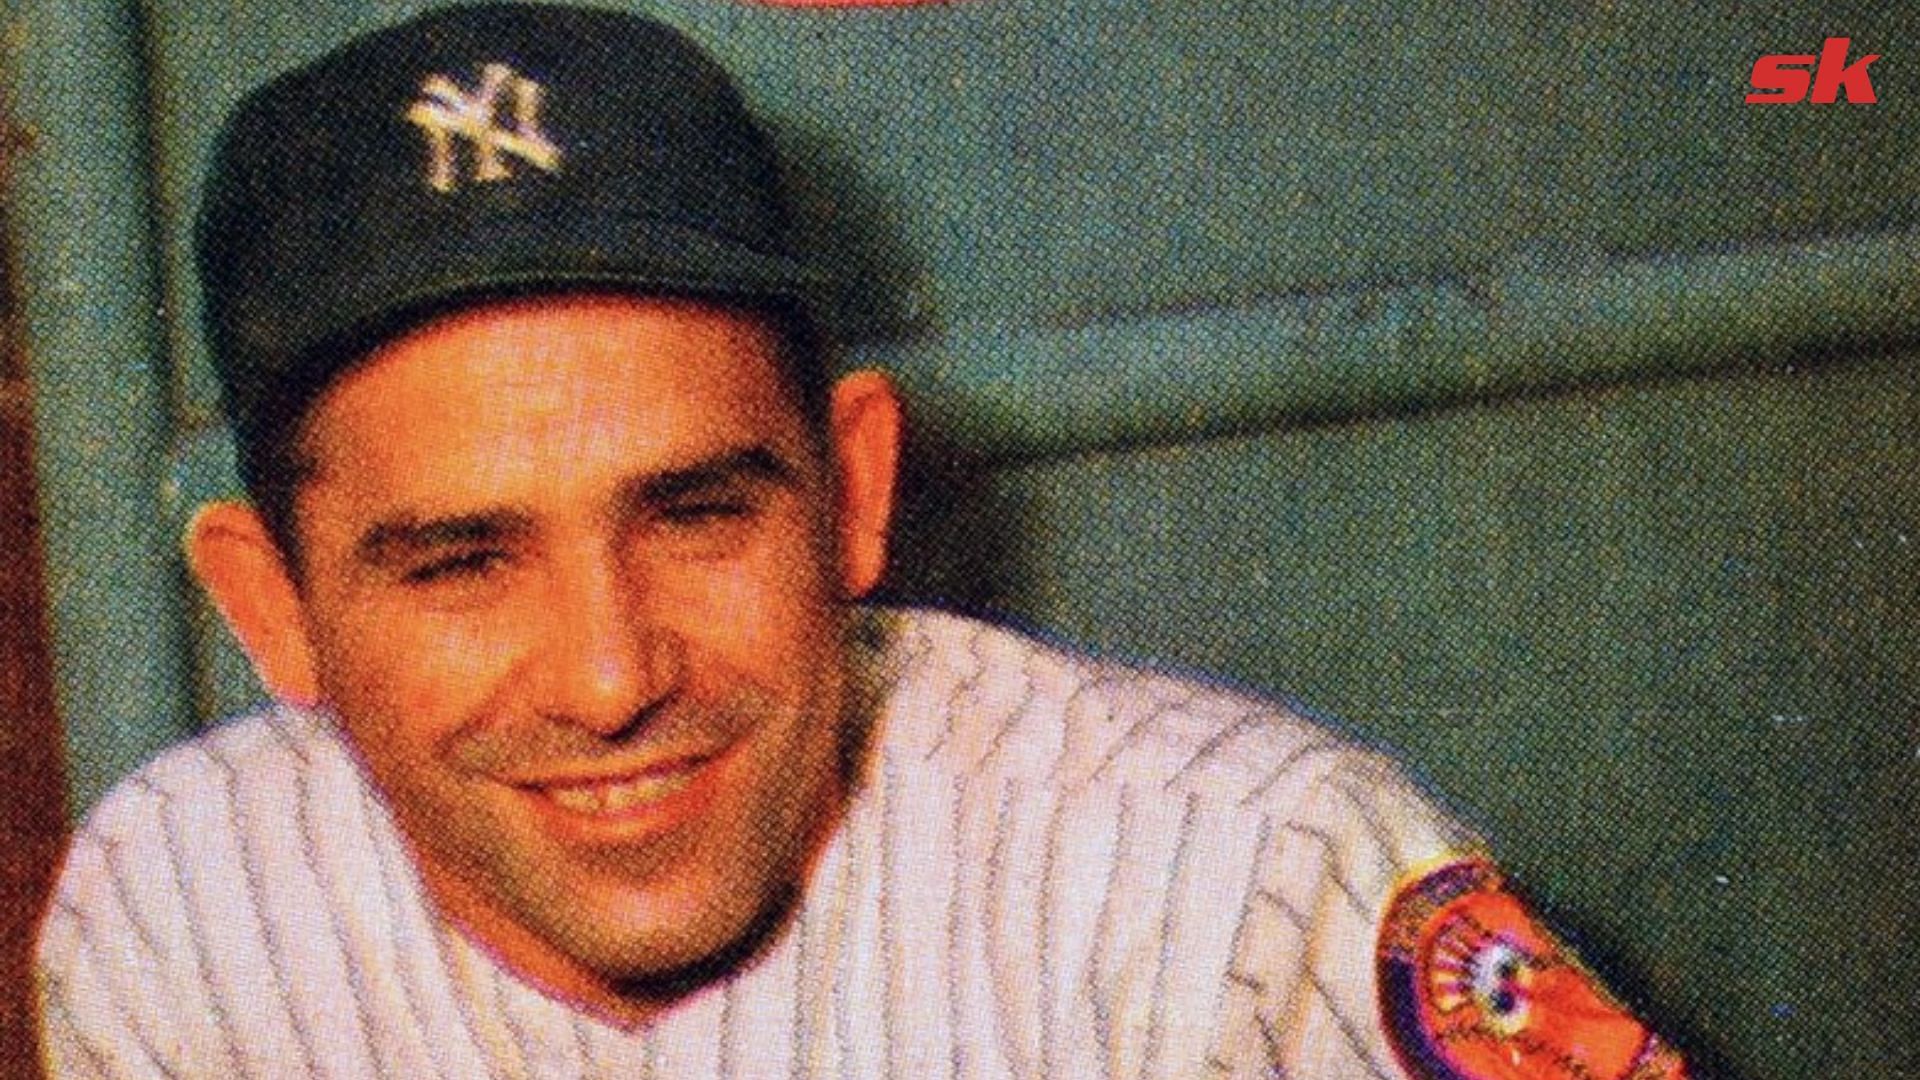 Official Poster of documentary depicting storied career of baseball legend Yogi Berra &quot;It Ain